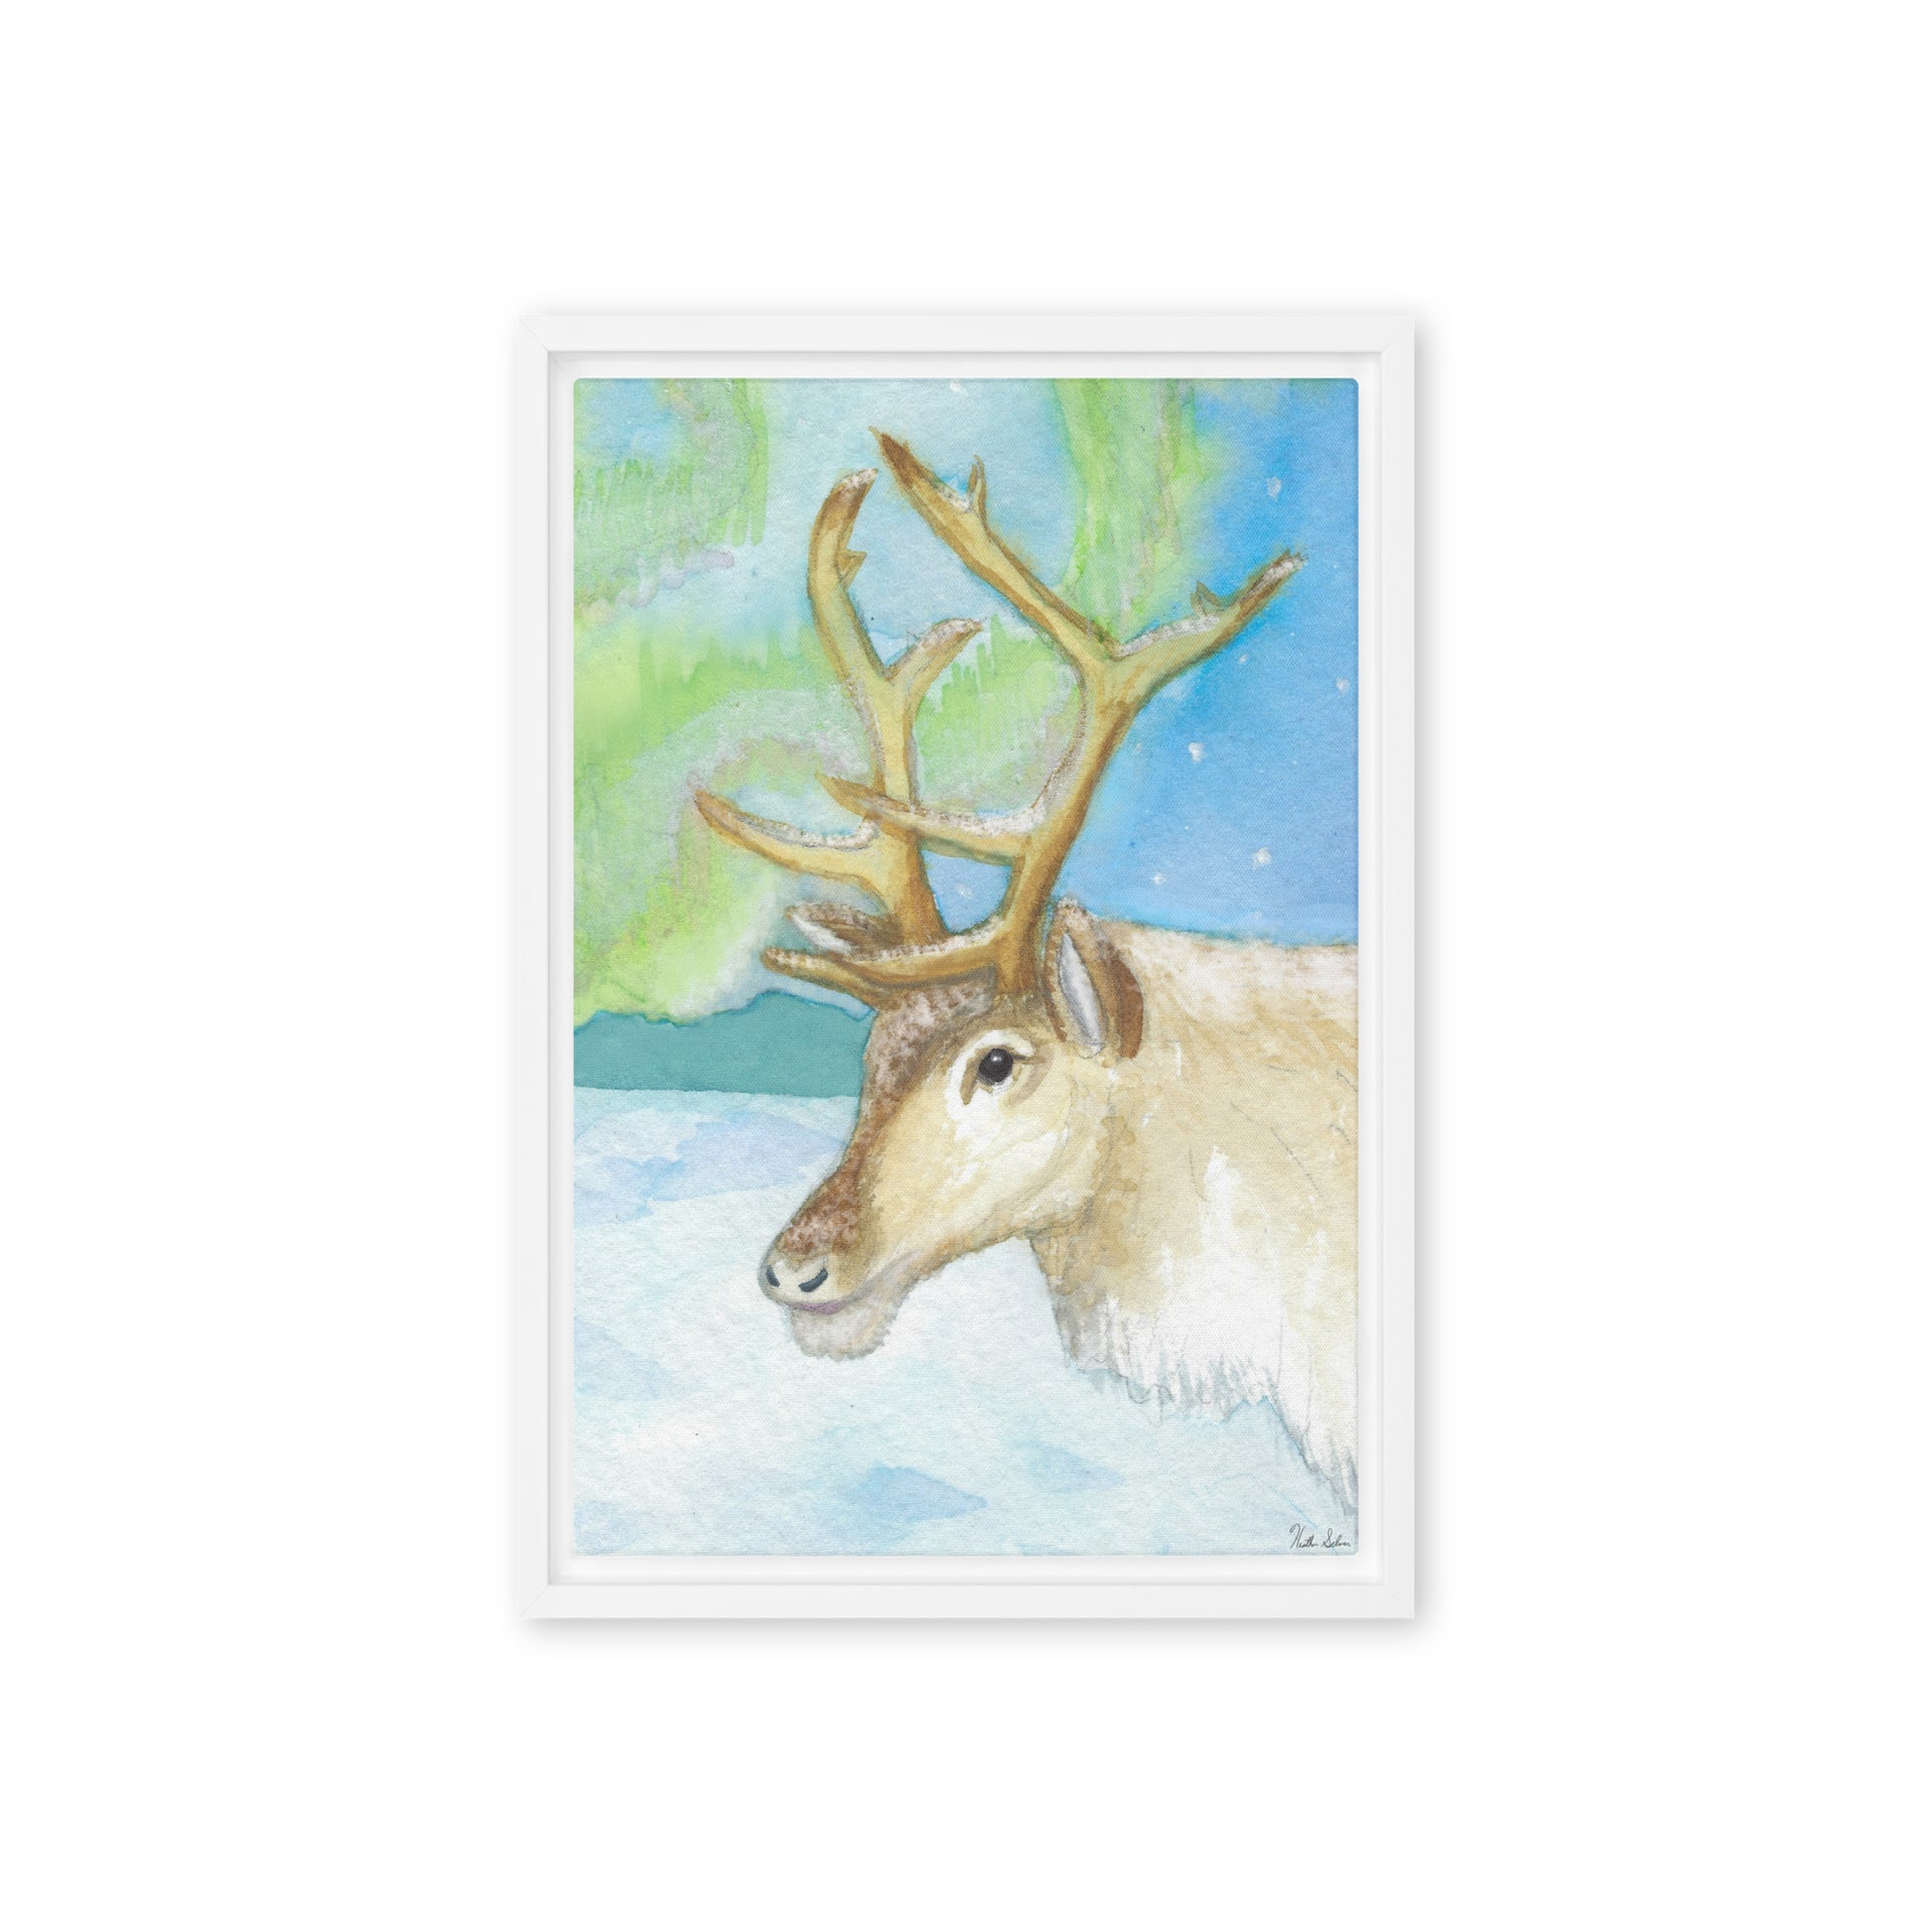 12 by 18 inch framed canvas art print of Heather Silver's Northern Lights Reindeer.  Canvas print mounted in a white pine frame. Hanging hardware included.